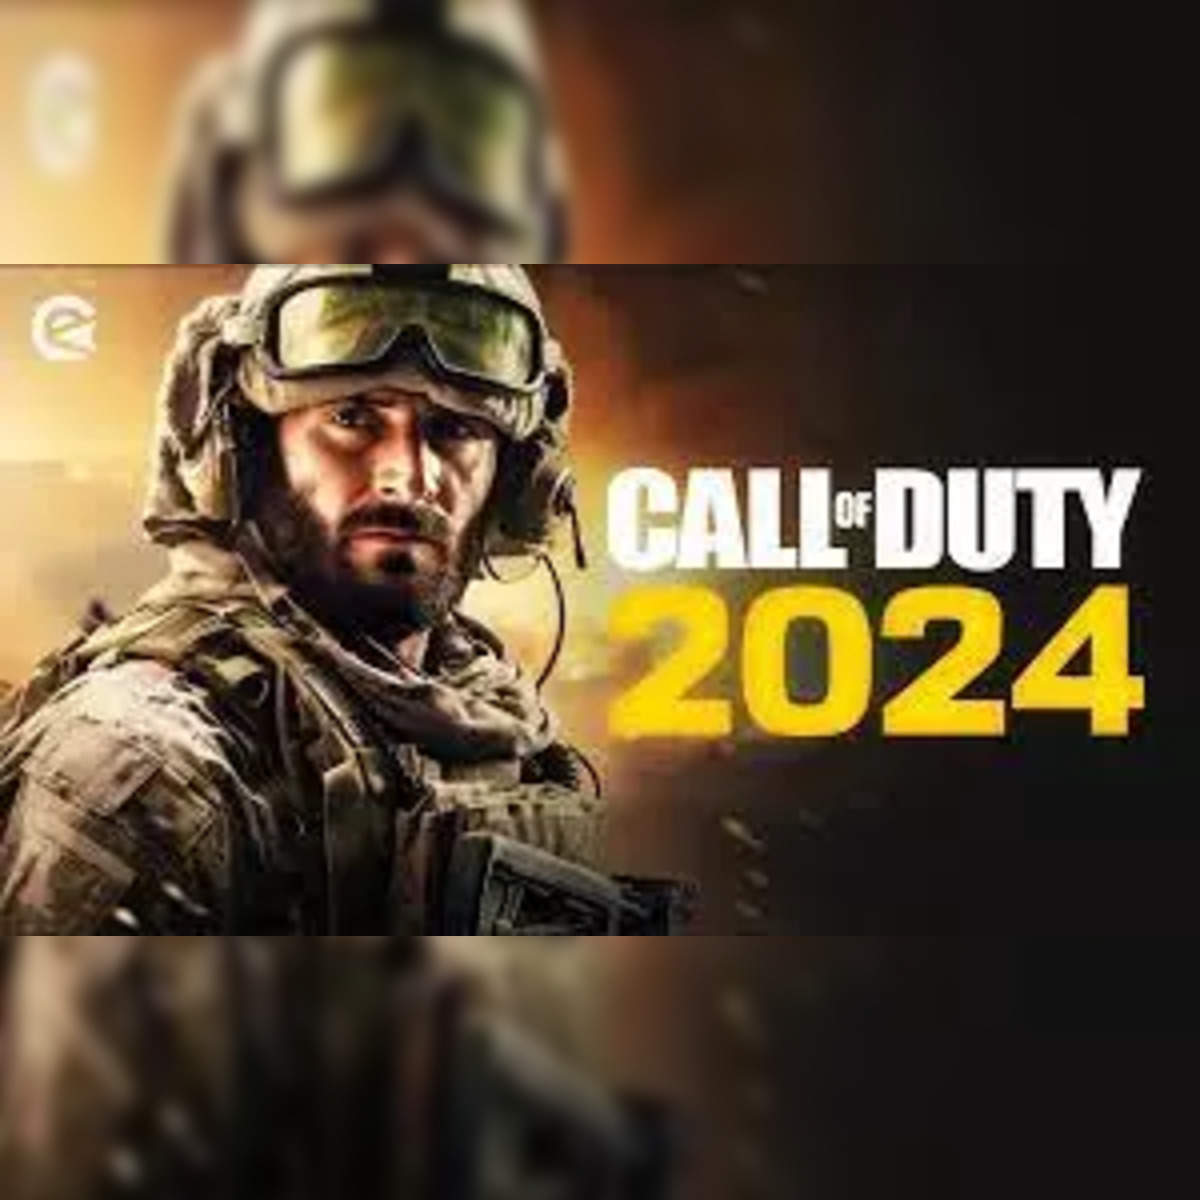 Call of Duty NEXT  Time to see what's in the NEXT Call of Duty